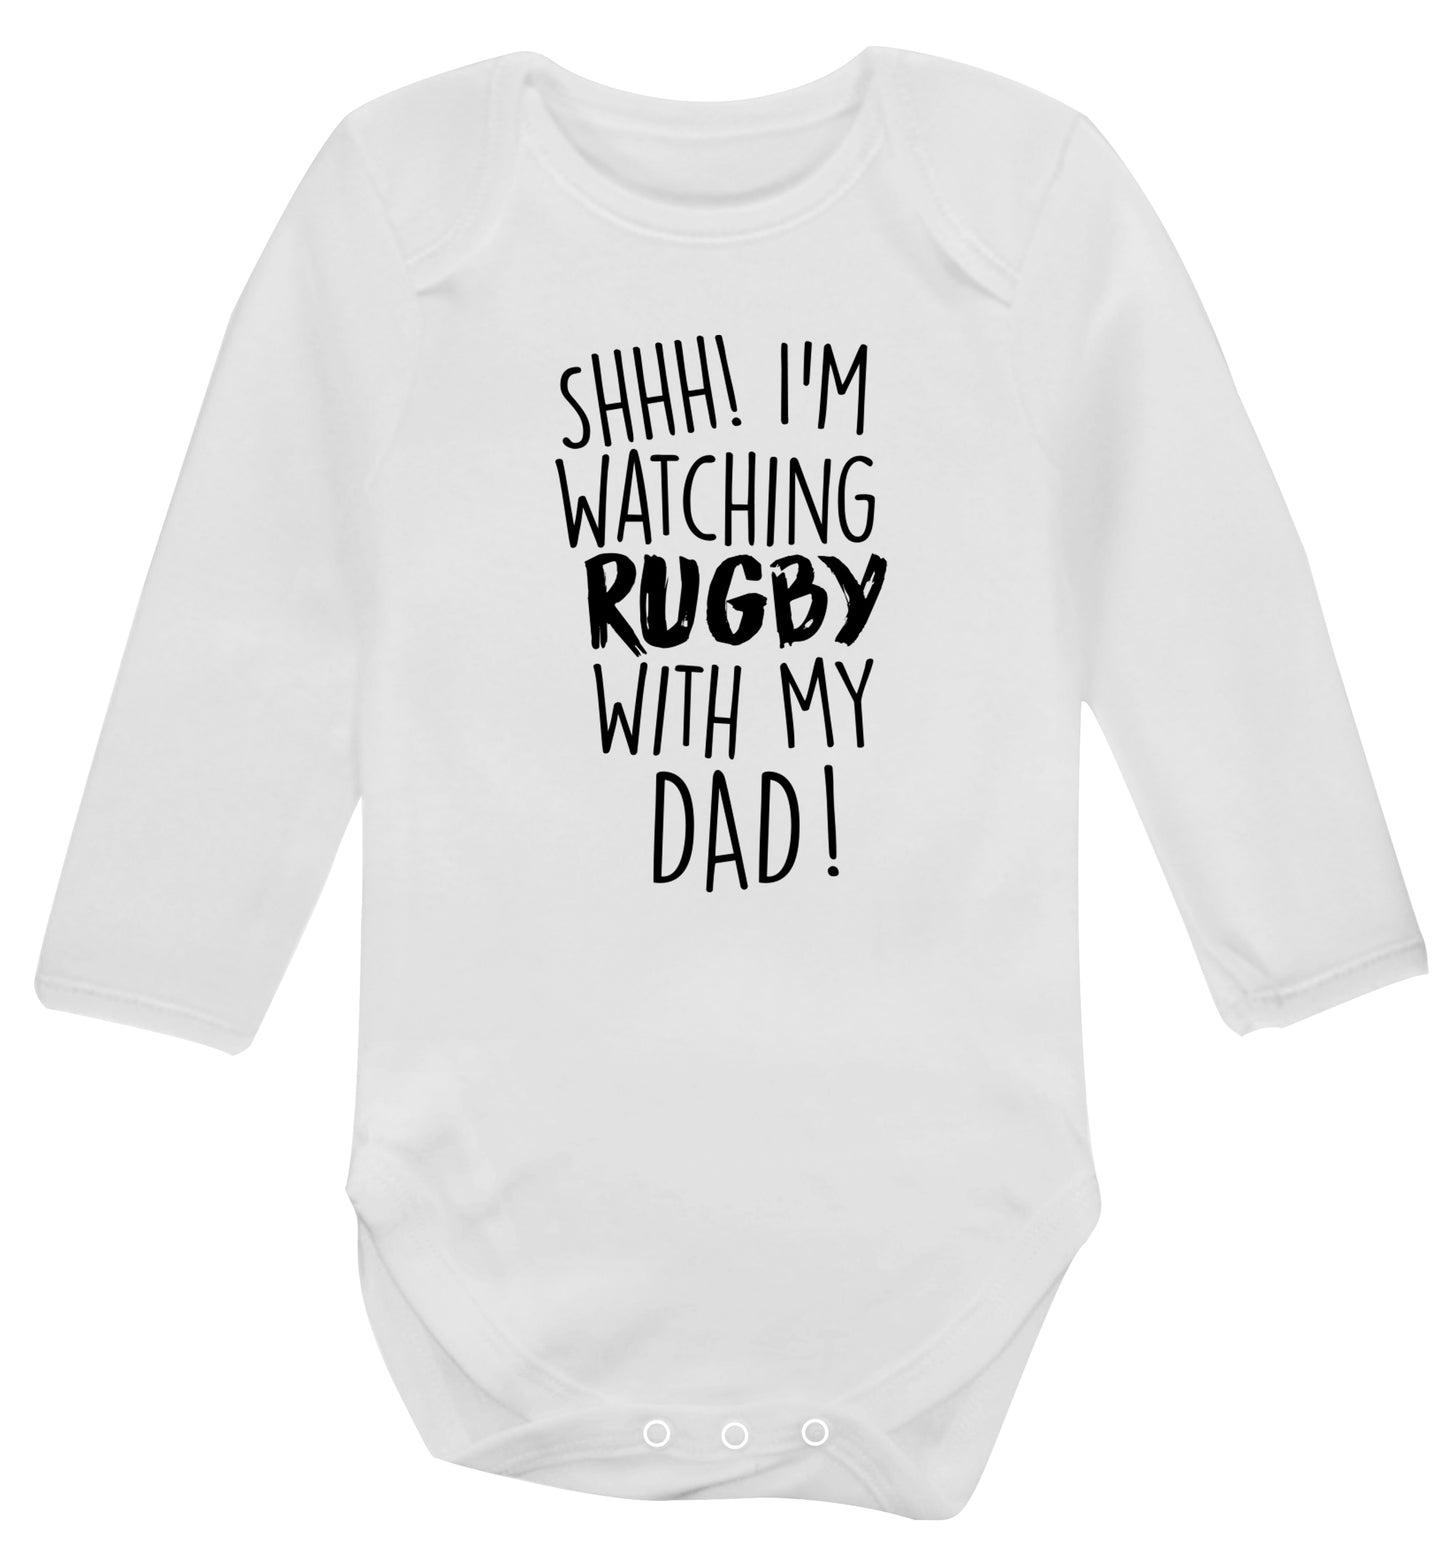 Shh... I'm watching rugby with my dad Baby Vest long sleeved white 6-12 months